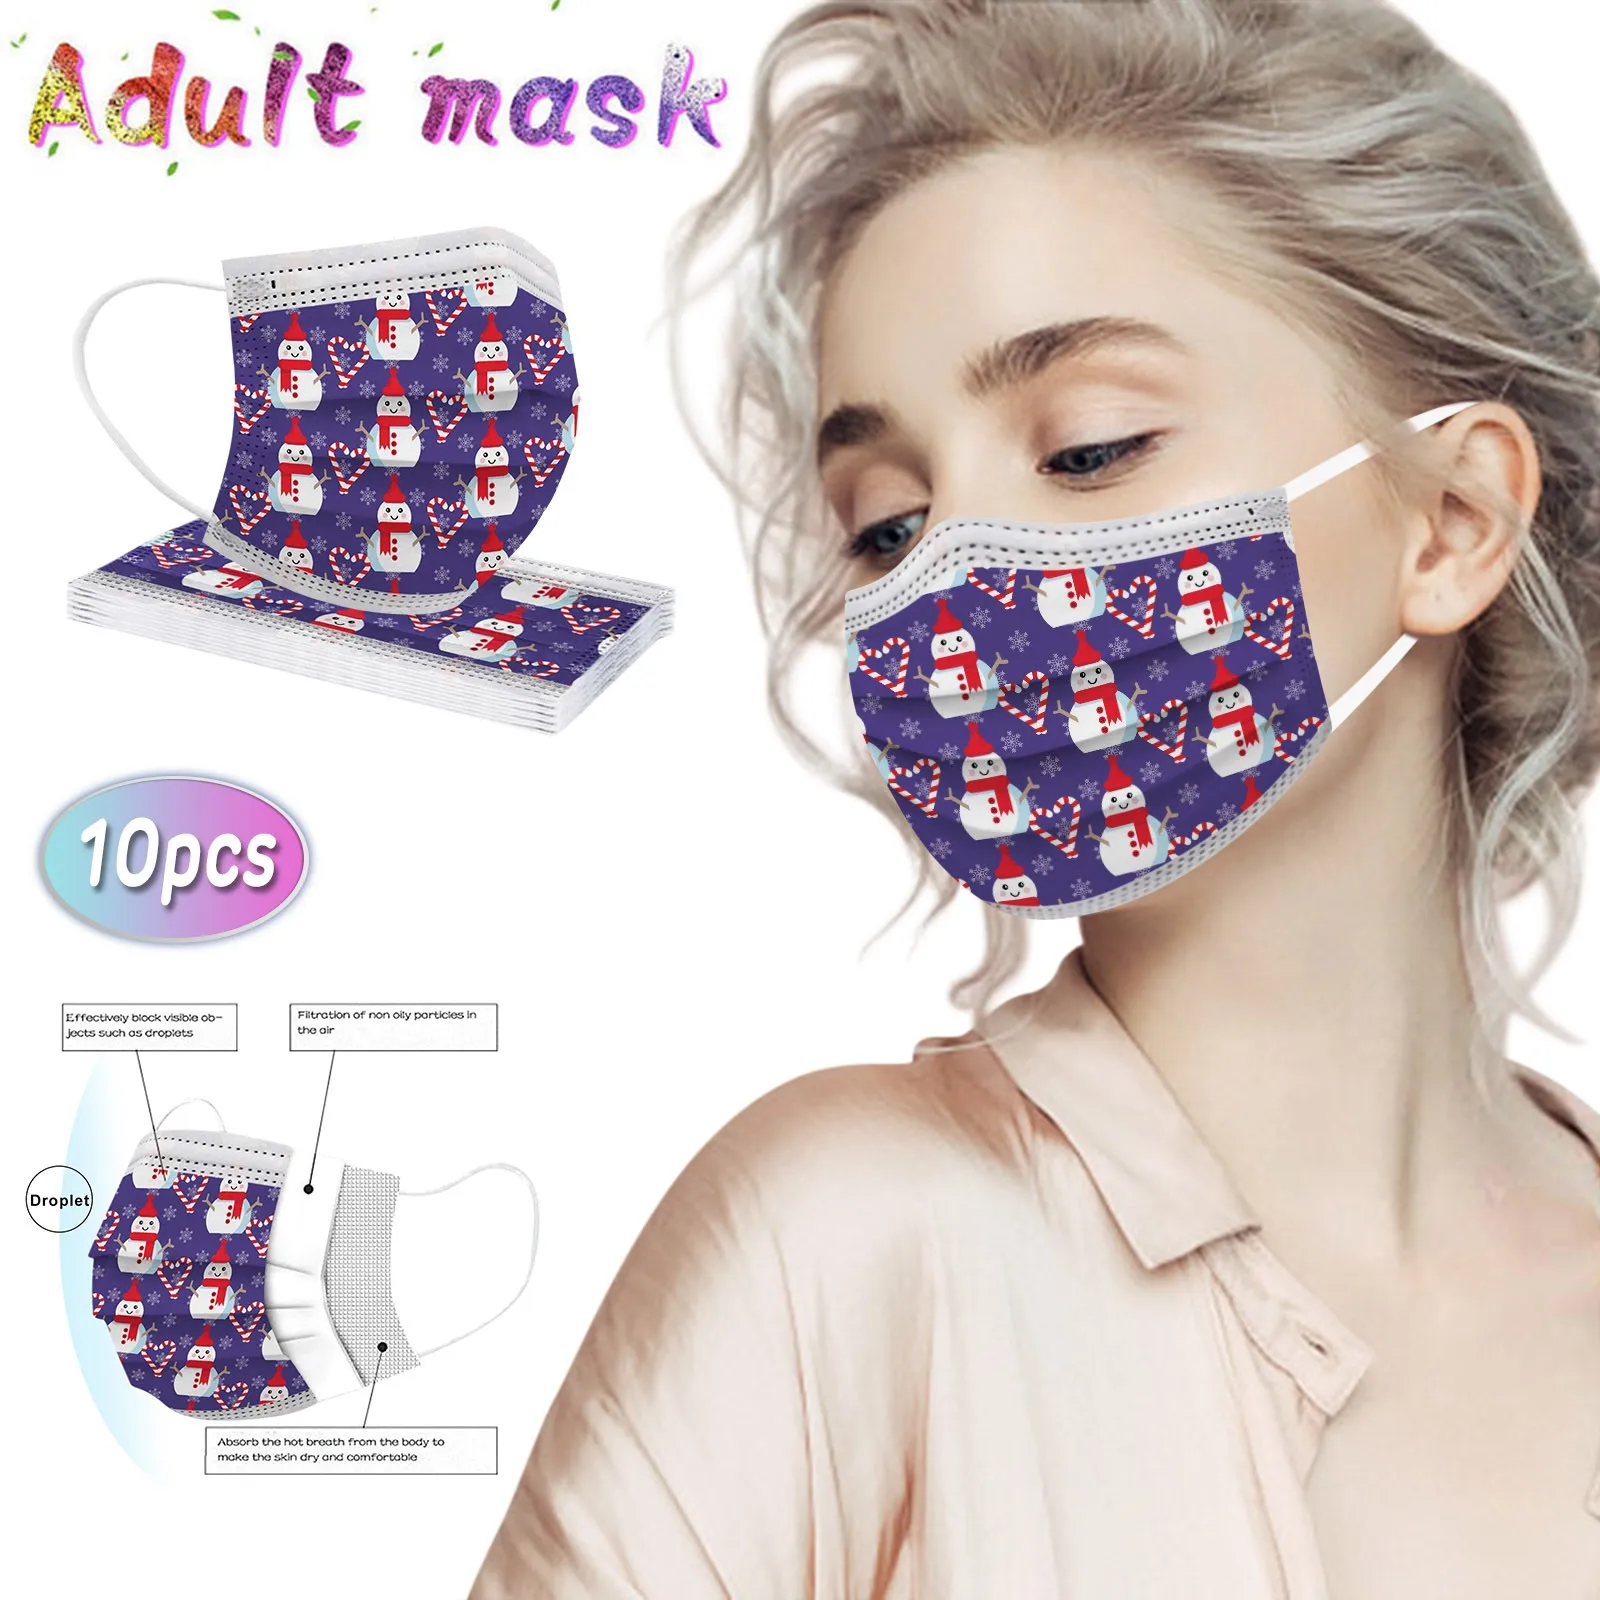 

10PC Adult's Disposable Face Mask Industrial 3-Layer Masks Unisex Dustproof Filter Pm2.5 Mask Earloop Bandage Masque Facemask